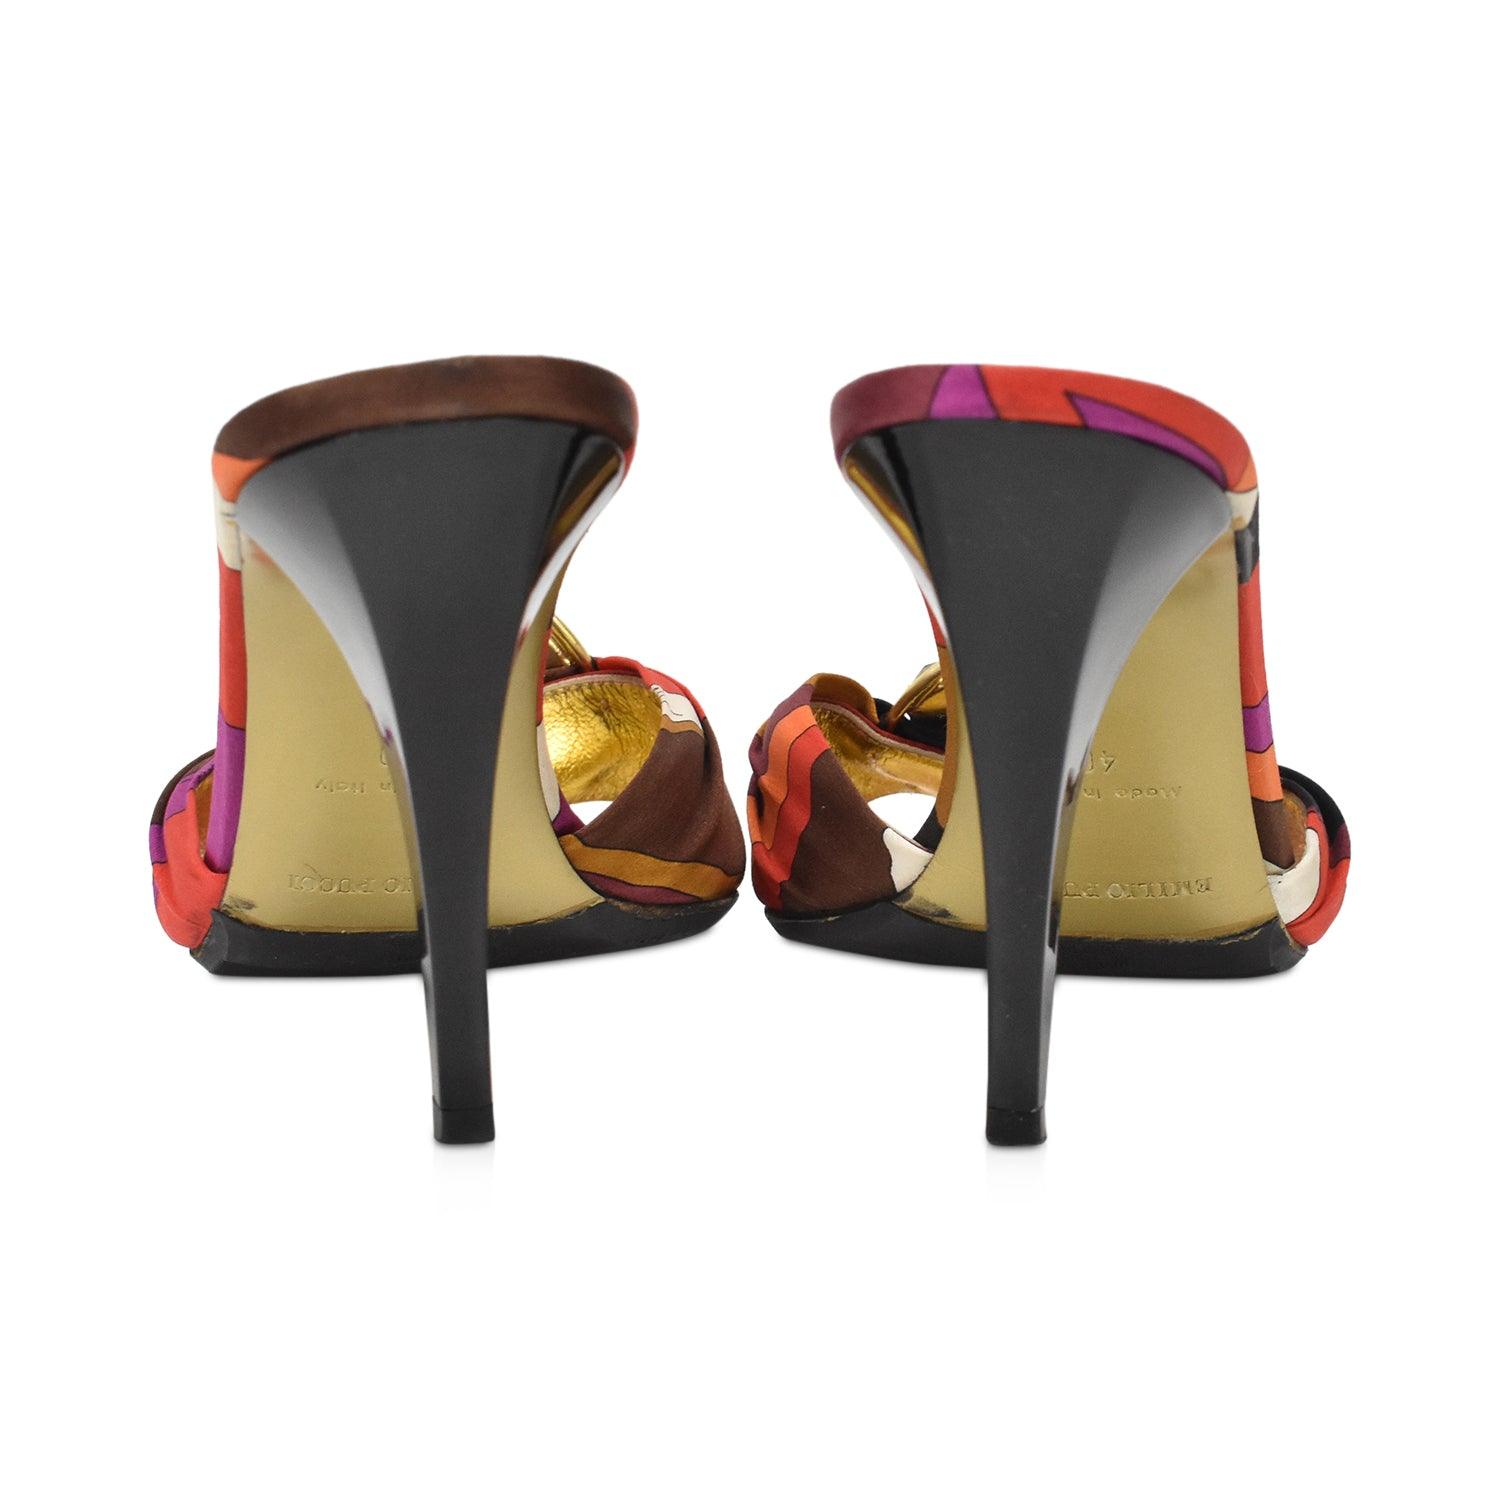 Emilio Pucci Mules - Women's 40 - Fashionably Yours